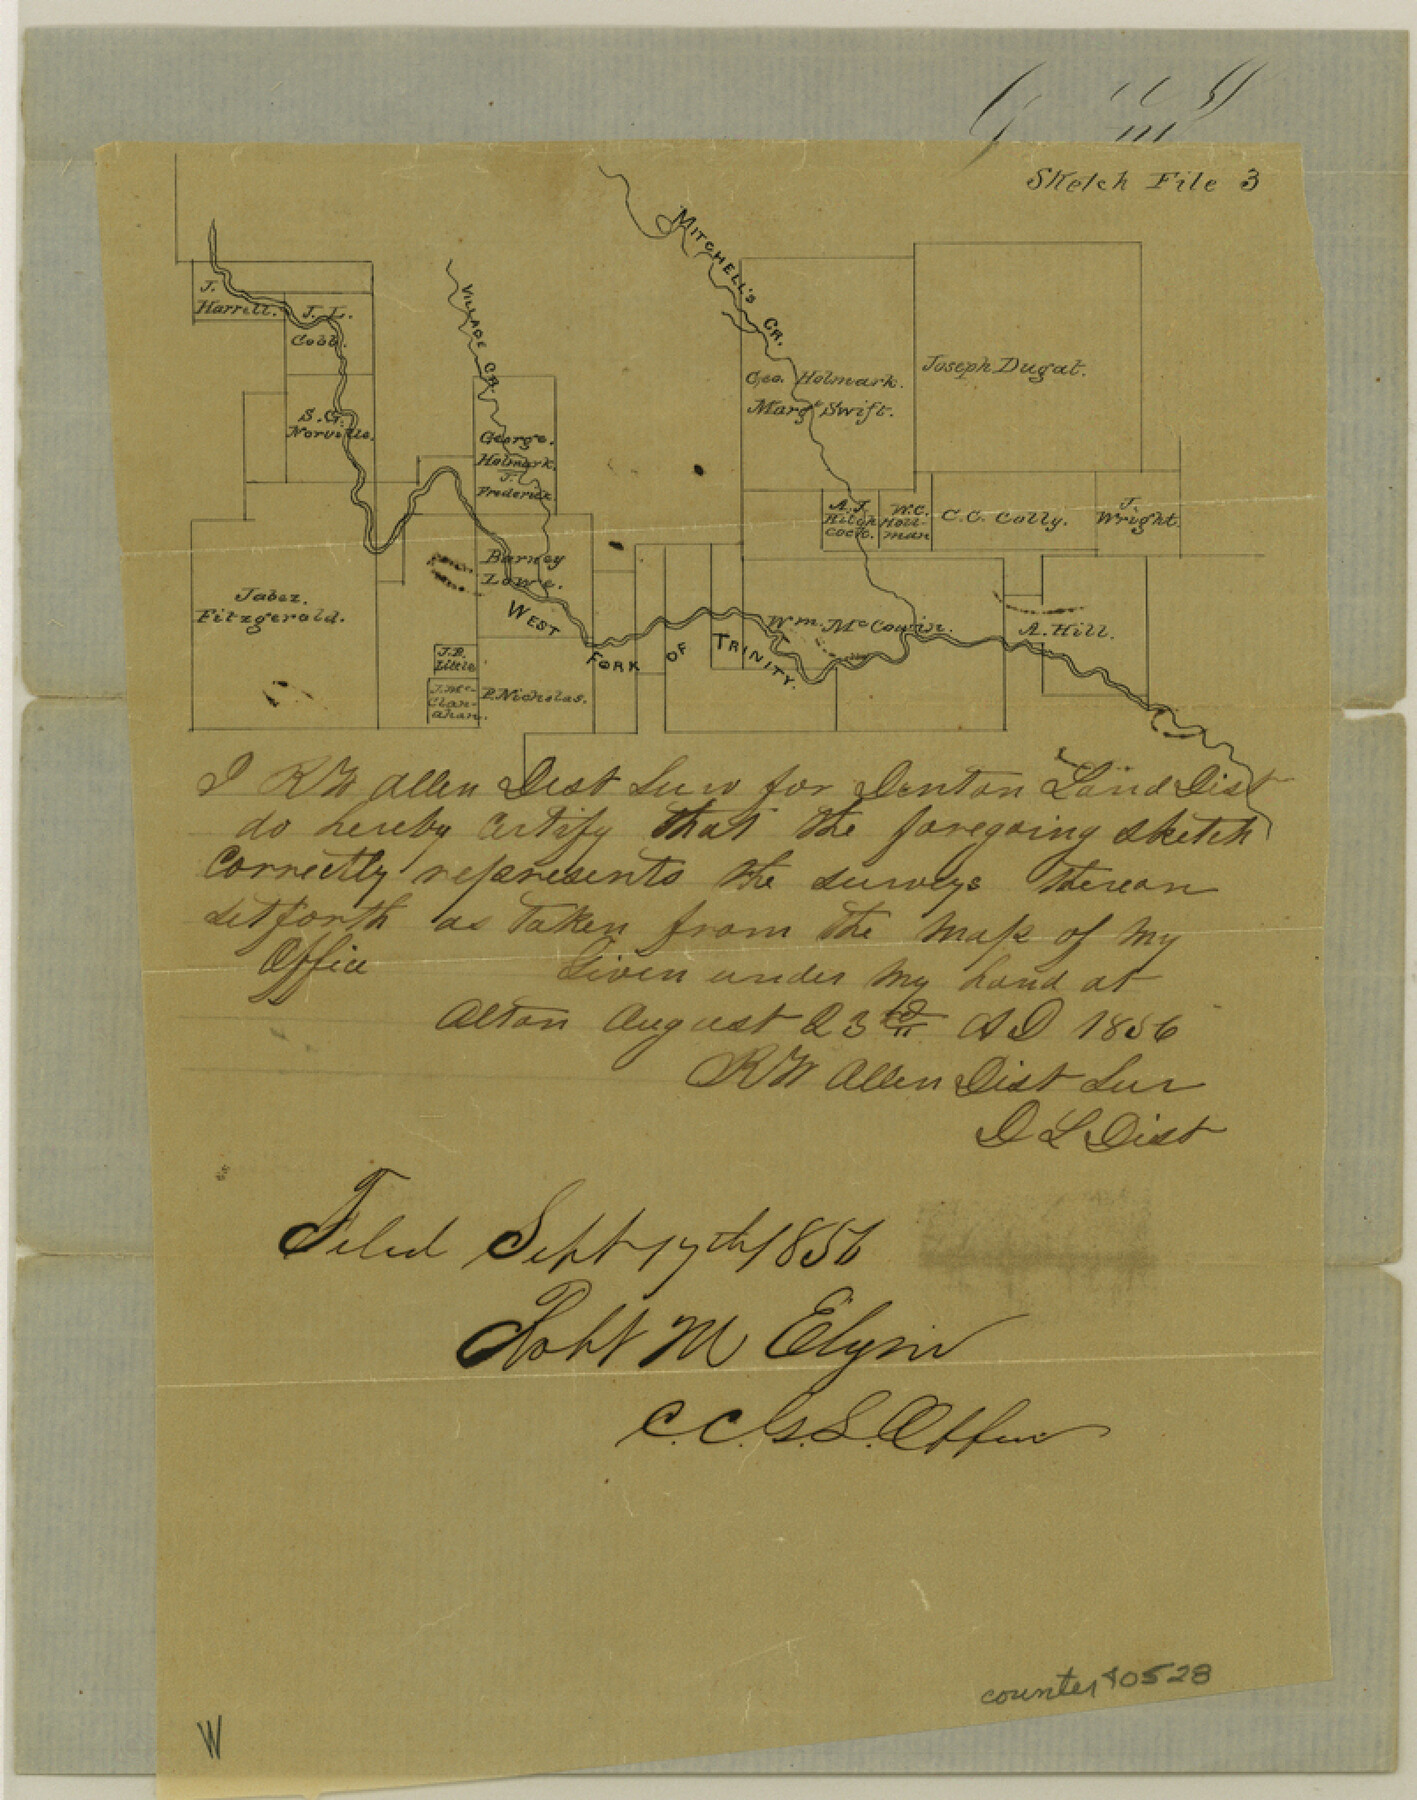 40528, Wise County Sketch File 3, General Map Collection